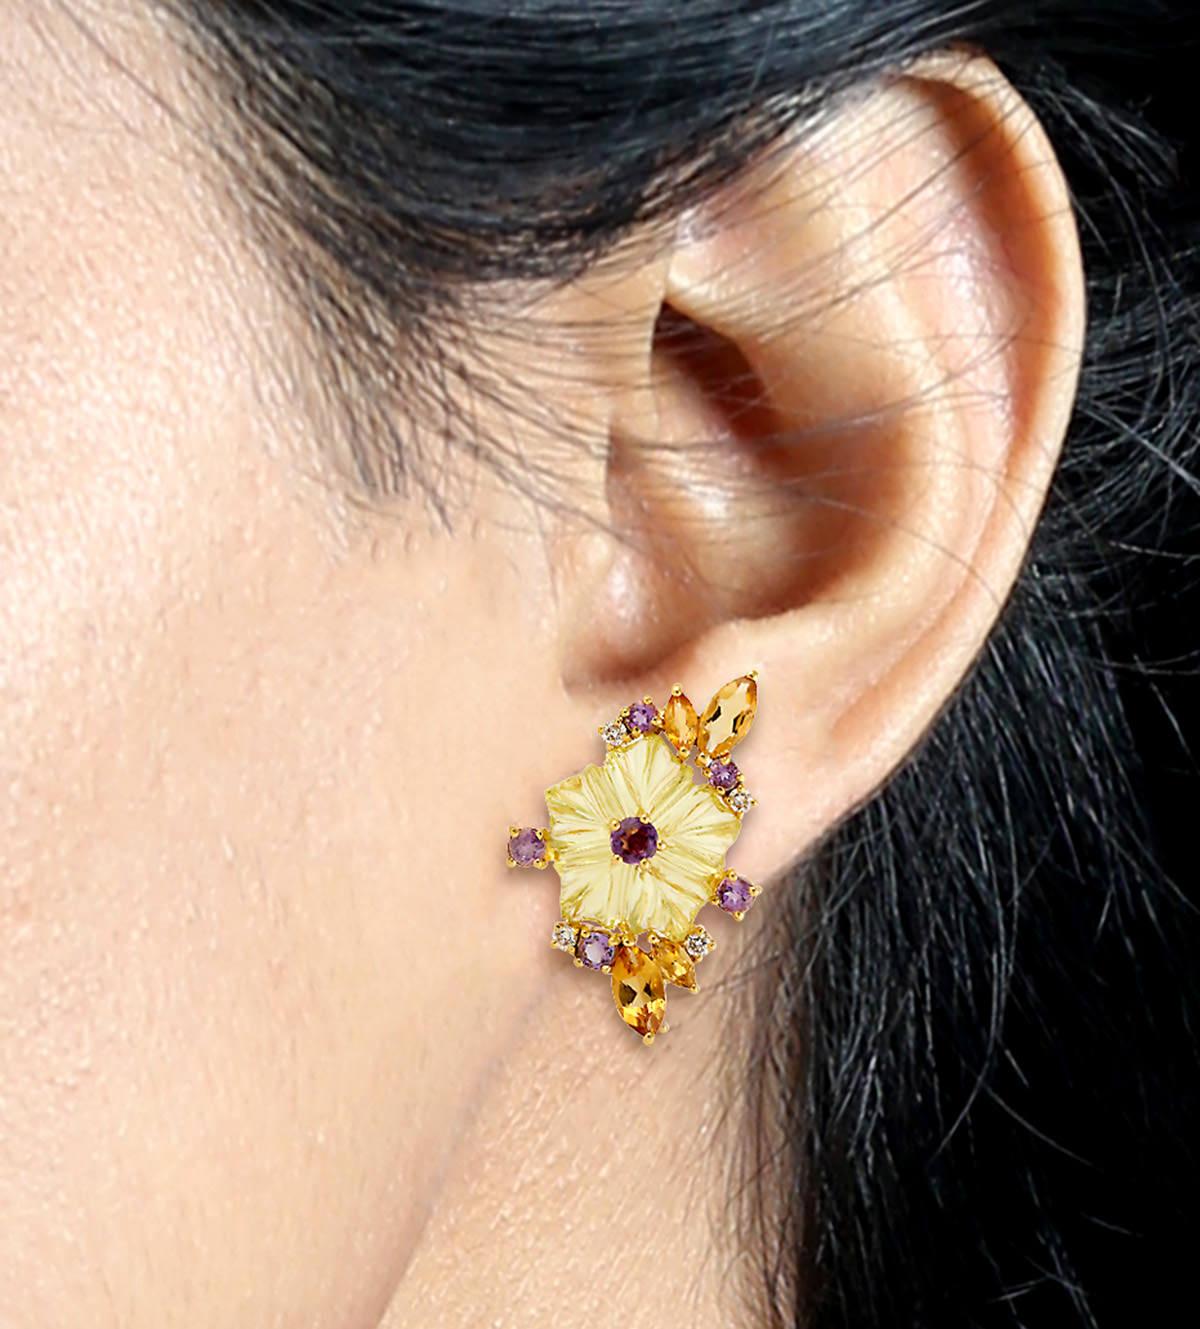 Contemporary Carved Flower Earrings Multicolored Natural Gemstones 18K Yellow Gold